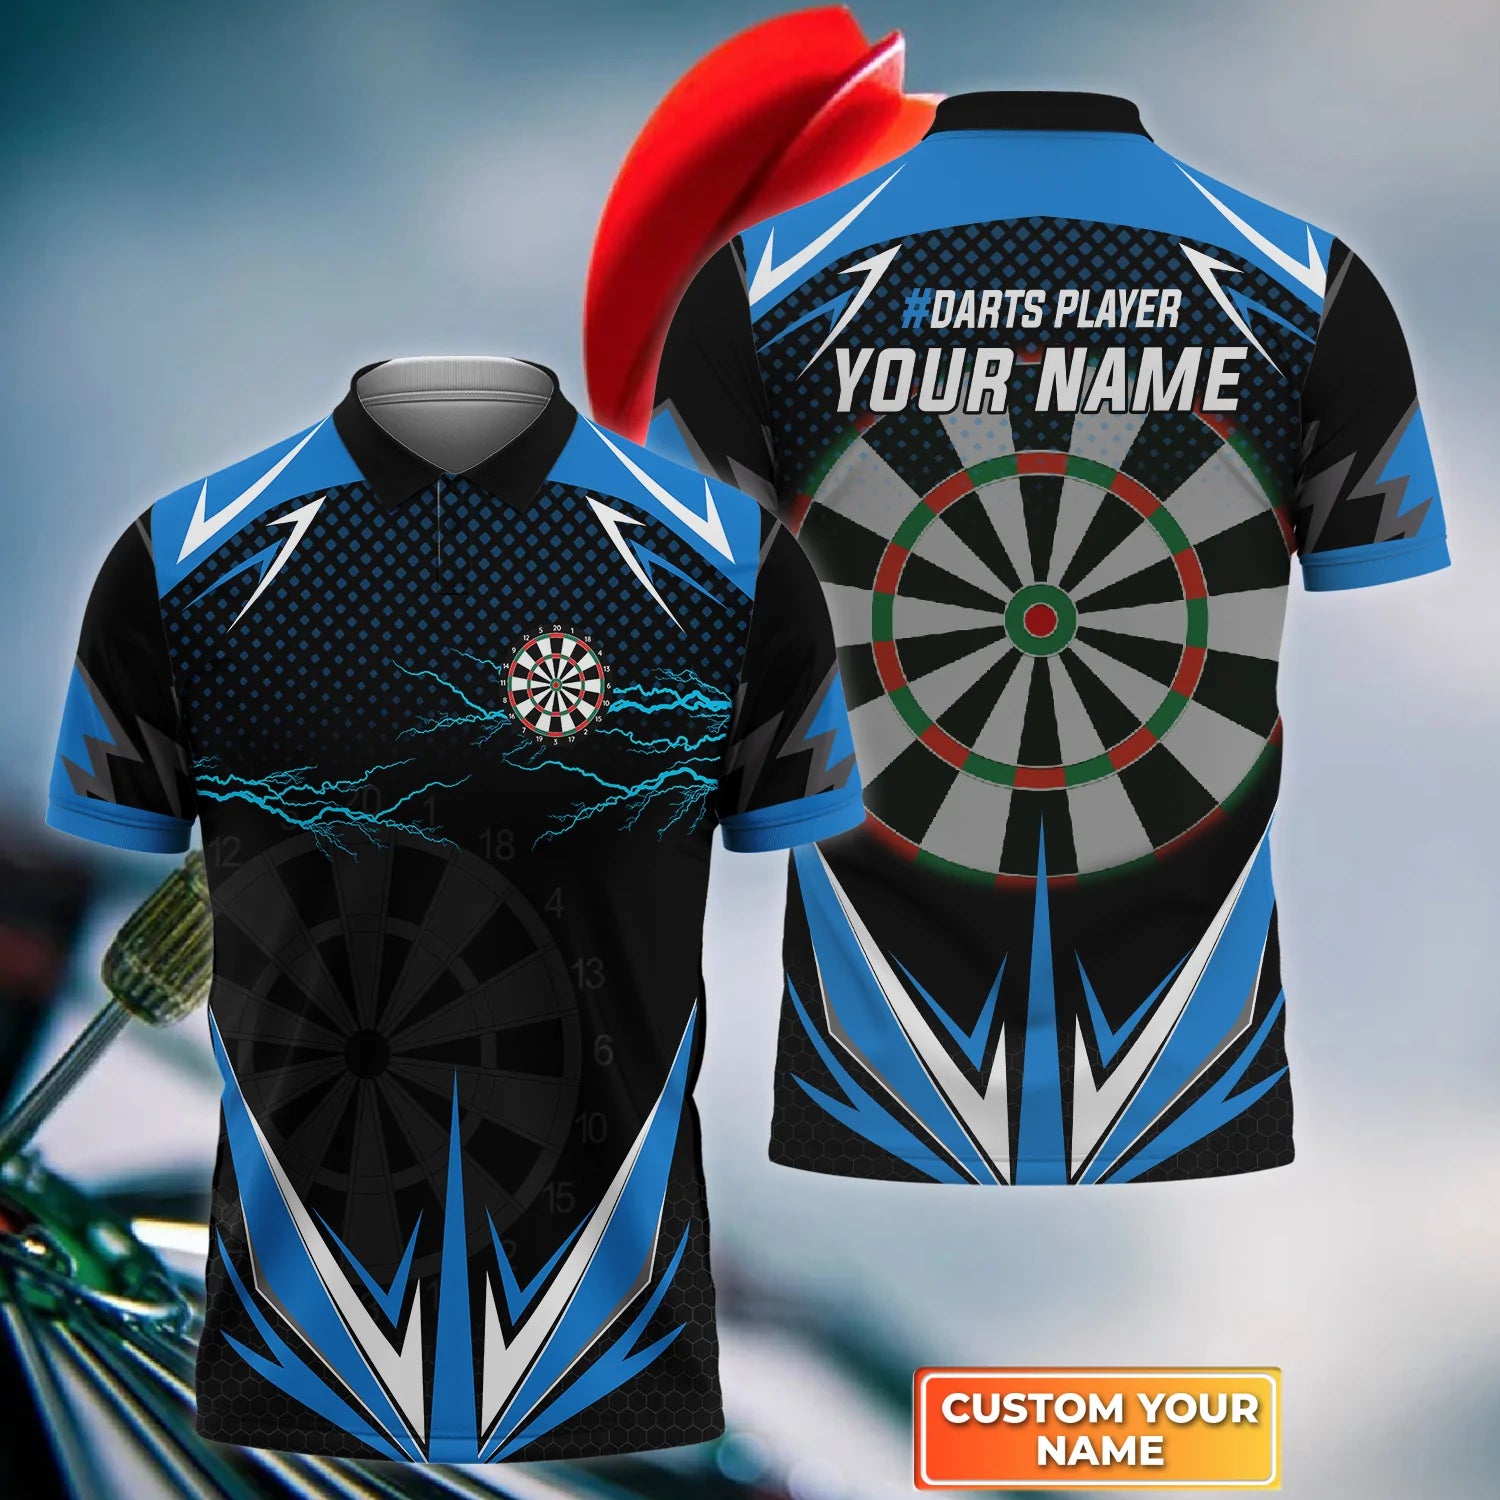 Personalized 3D Polo Shirt for Dart Enthusiasts: Blue Lightning with Custom Name, Ideal for Men’s Dart Team Shirts – DP109